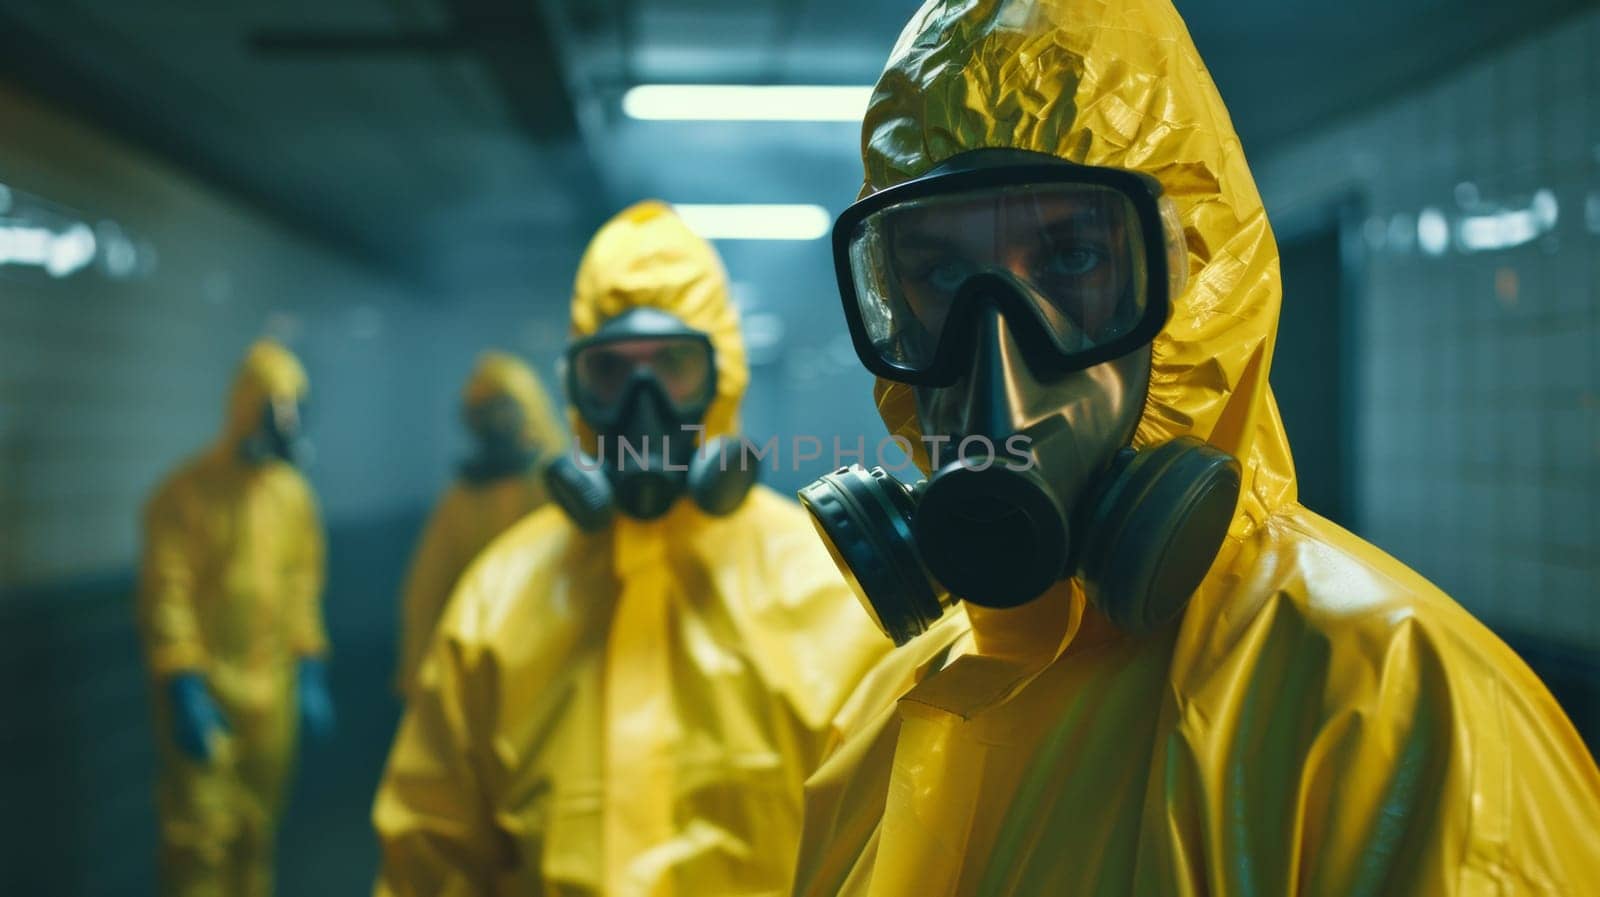 A group of people in yellow hazmat suits and gas masks